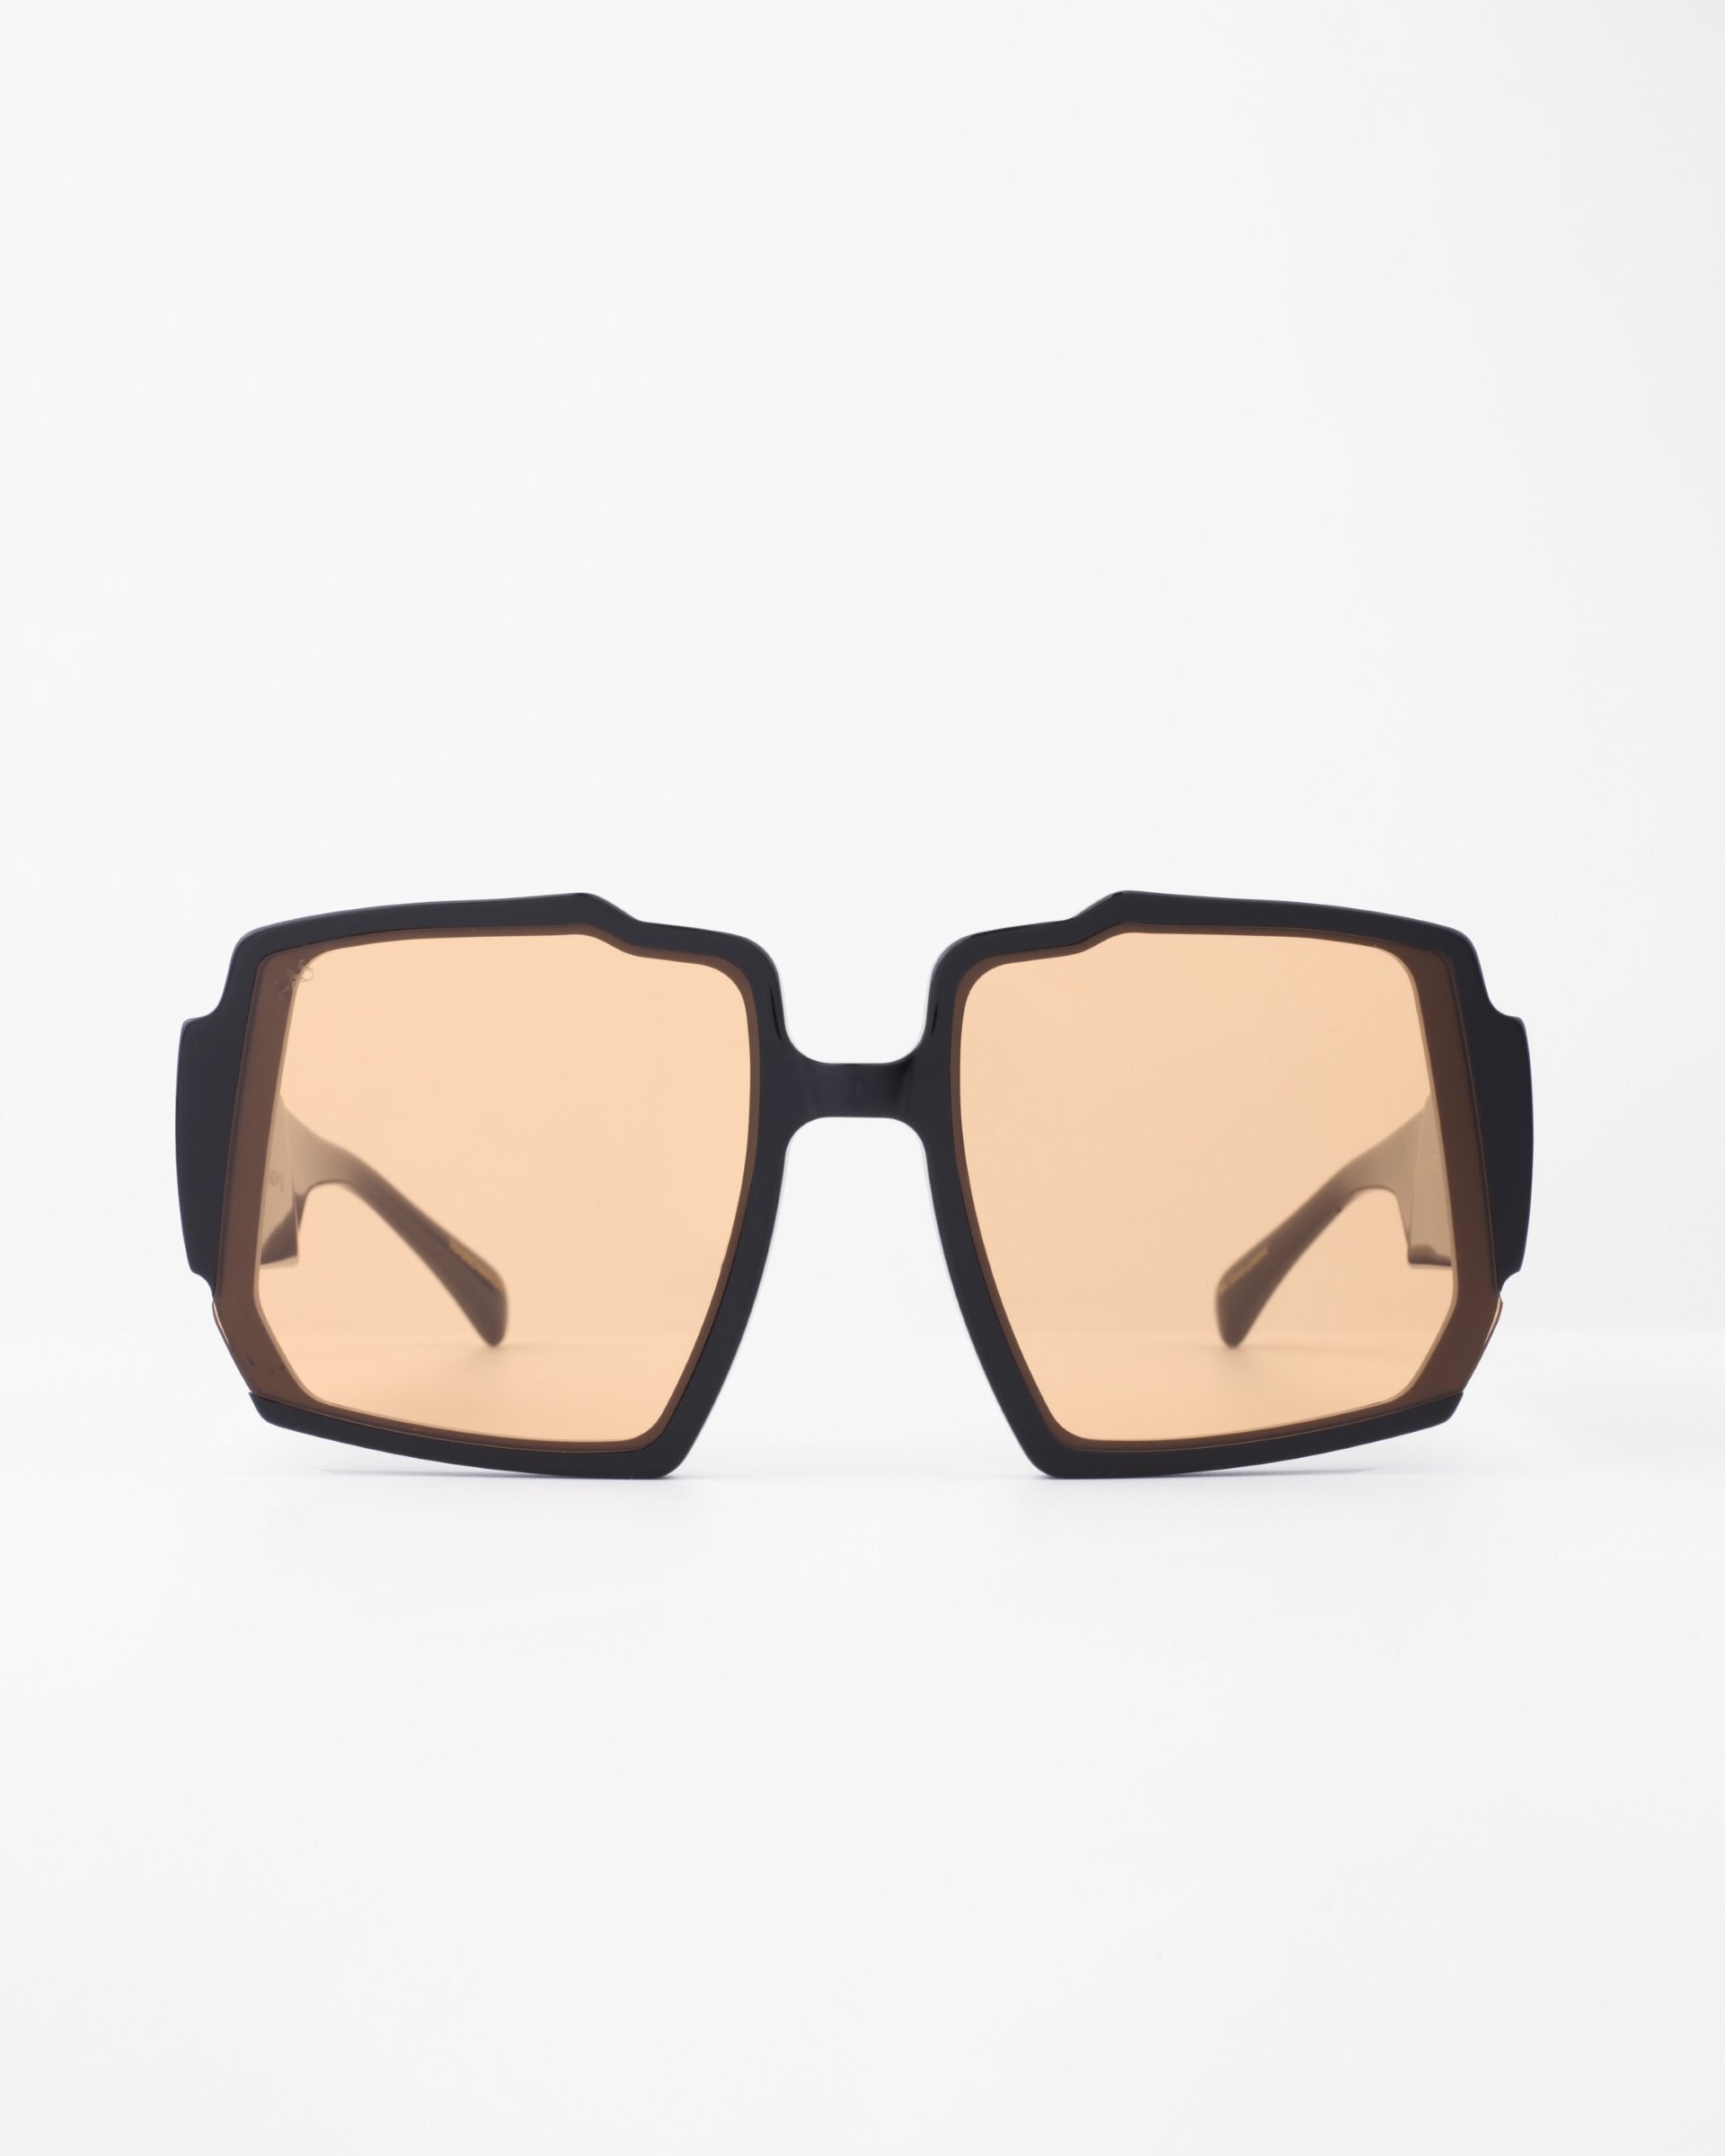 A pair of stylish black square-framed Moritz by For Art&#39;s Sake® with light brown tinted, UV-protected lenses. Featuring a chunky acetate frame and subtle gold-plated inlay, the Moritz sunglasses are displayed against a plain white background, giving a clear view of their modern and sleek design.